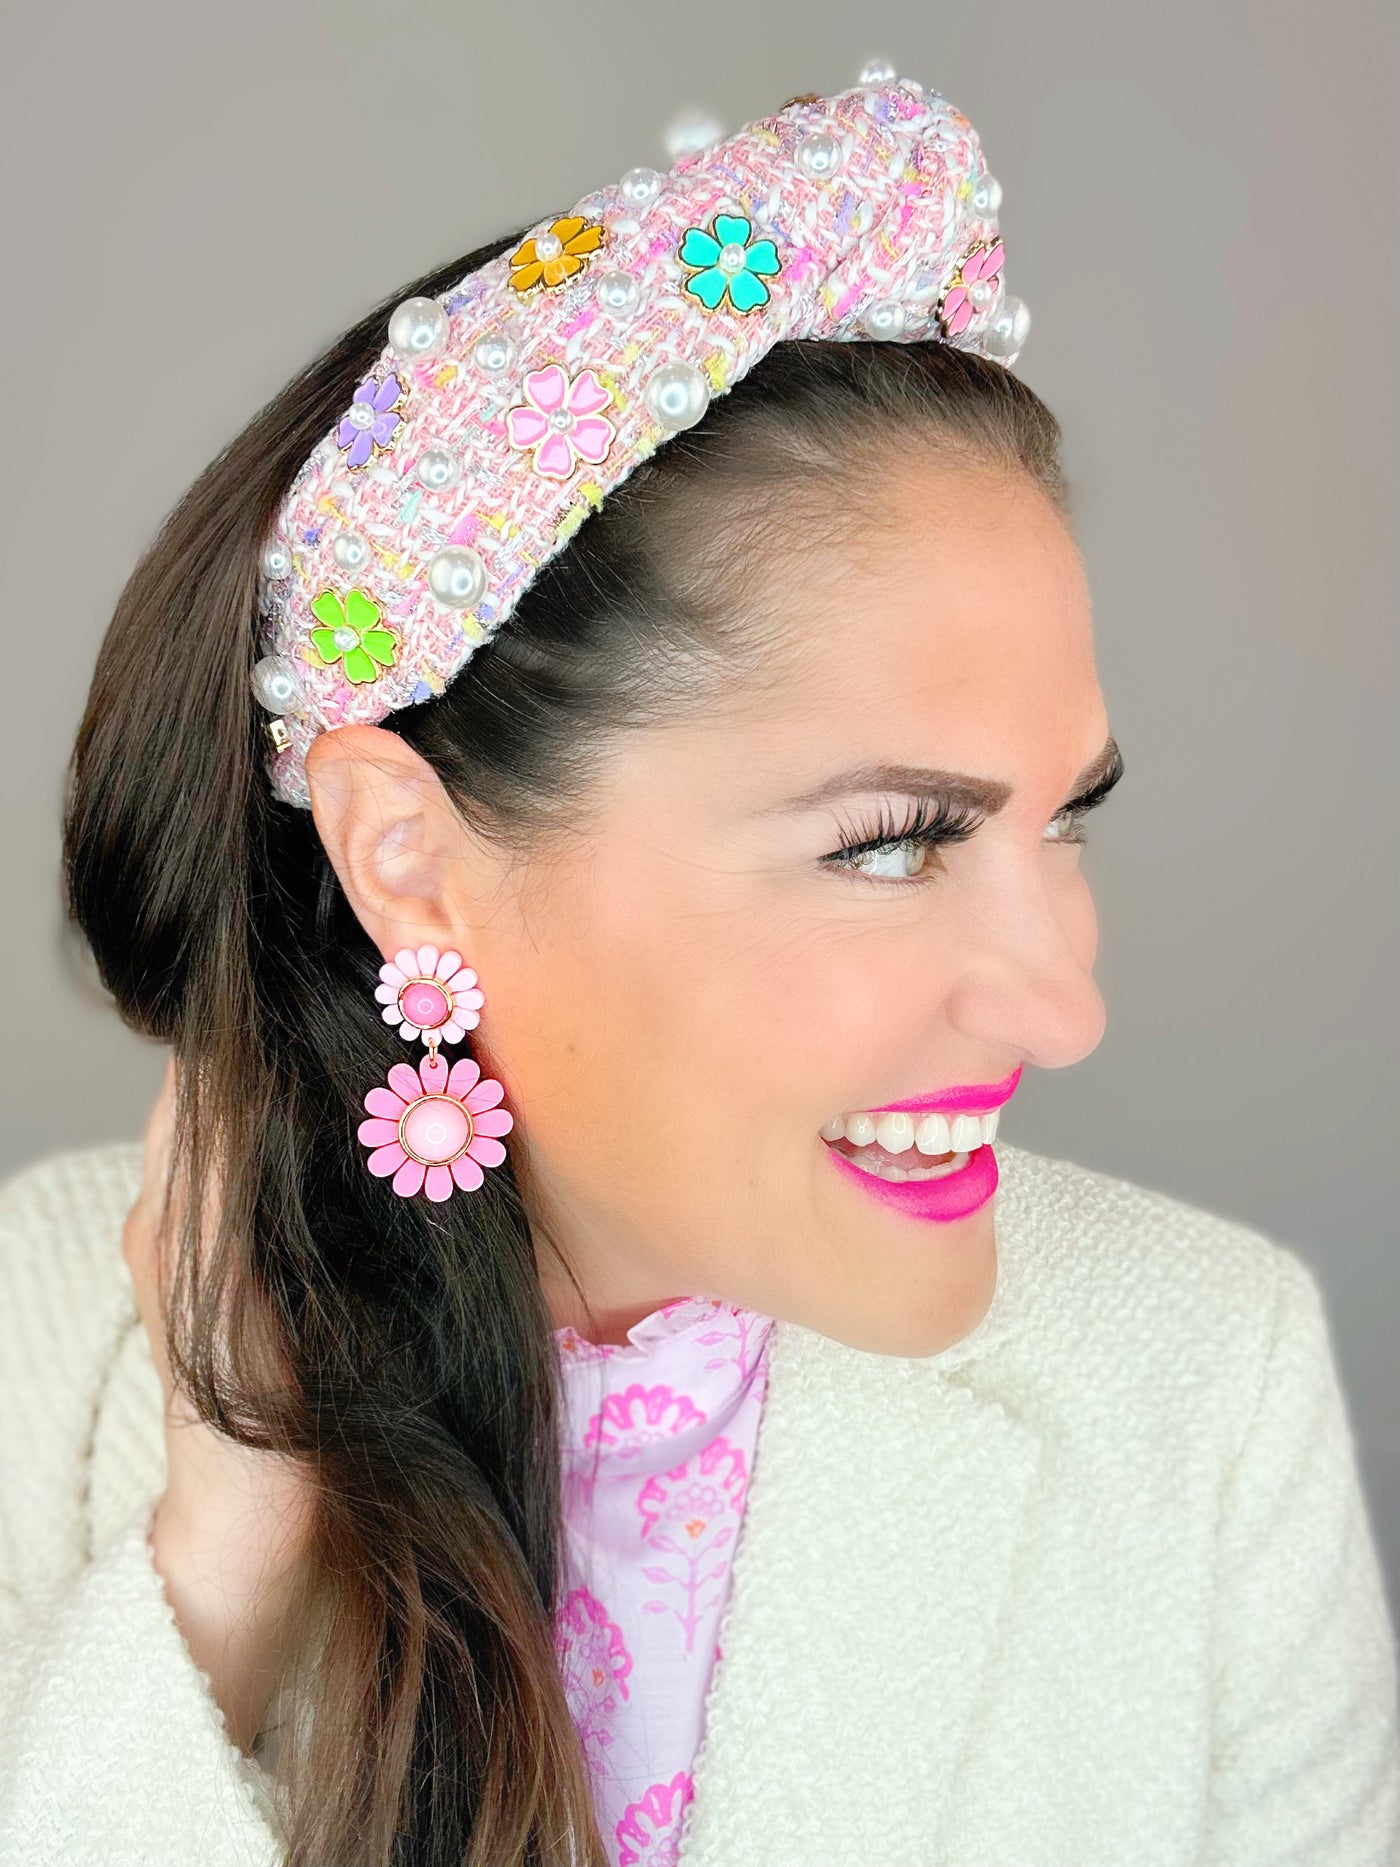 Adult Size Pink Tweed Headband with Flowers